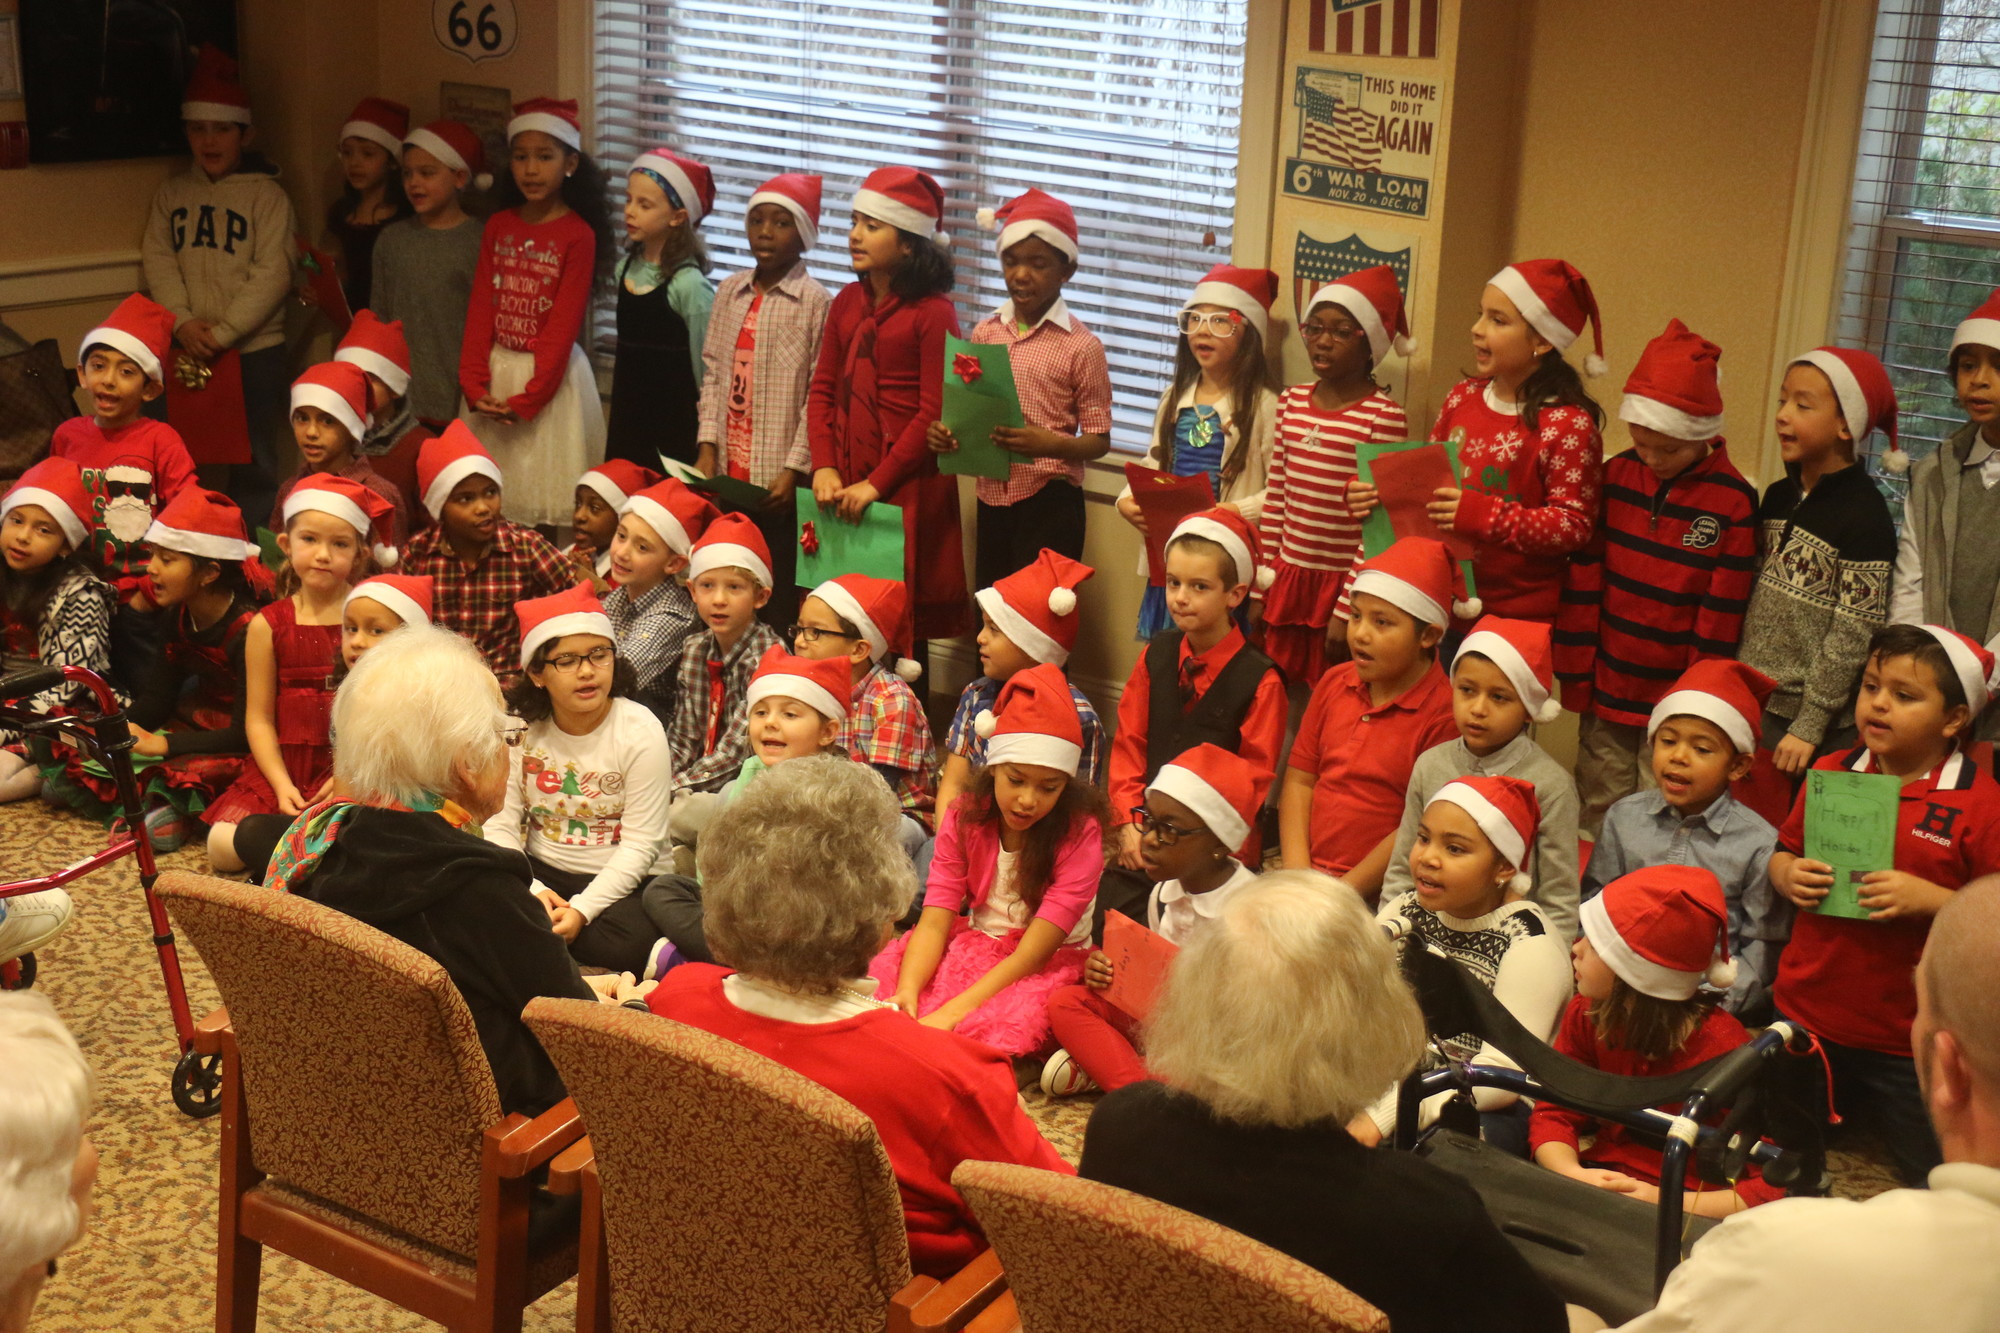 William L. Buck Elementary School students sang carols and recited holiday verses at the Atria Tanglewood assisted living facility in Lynbrook on Dec. 17.